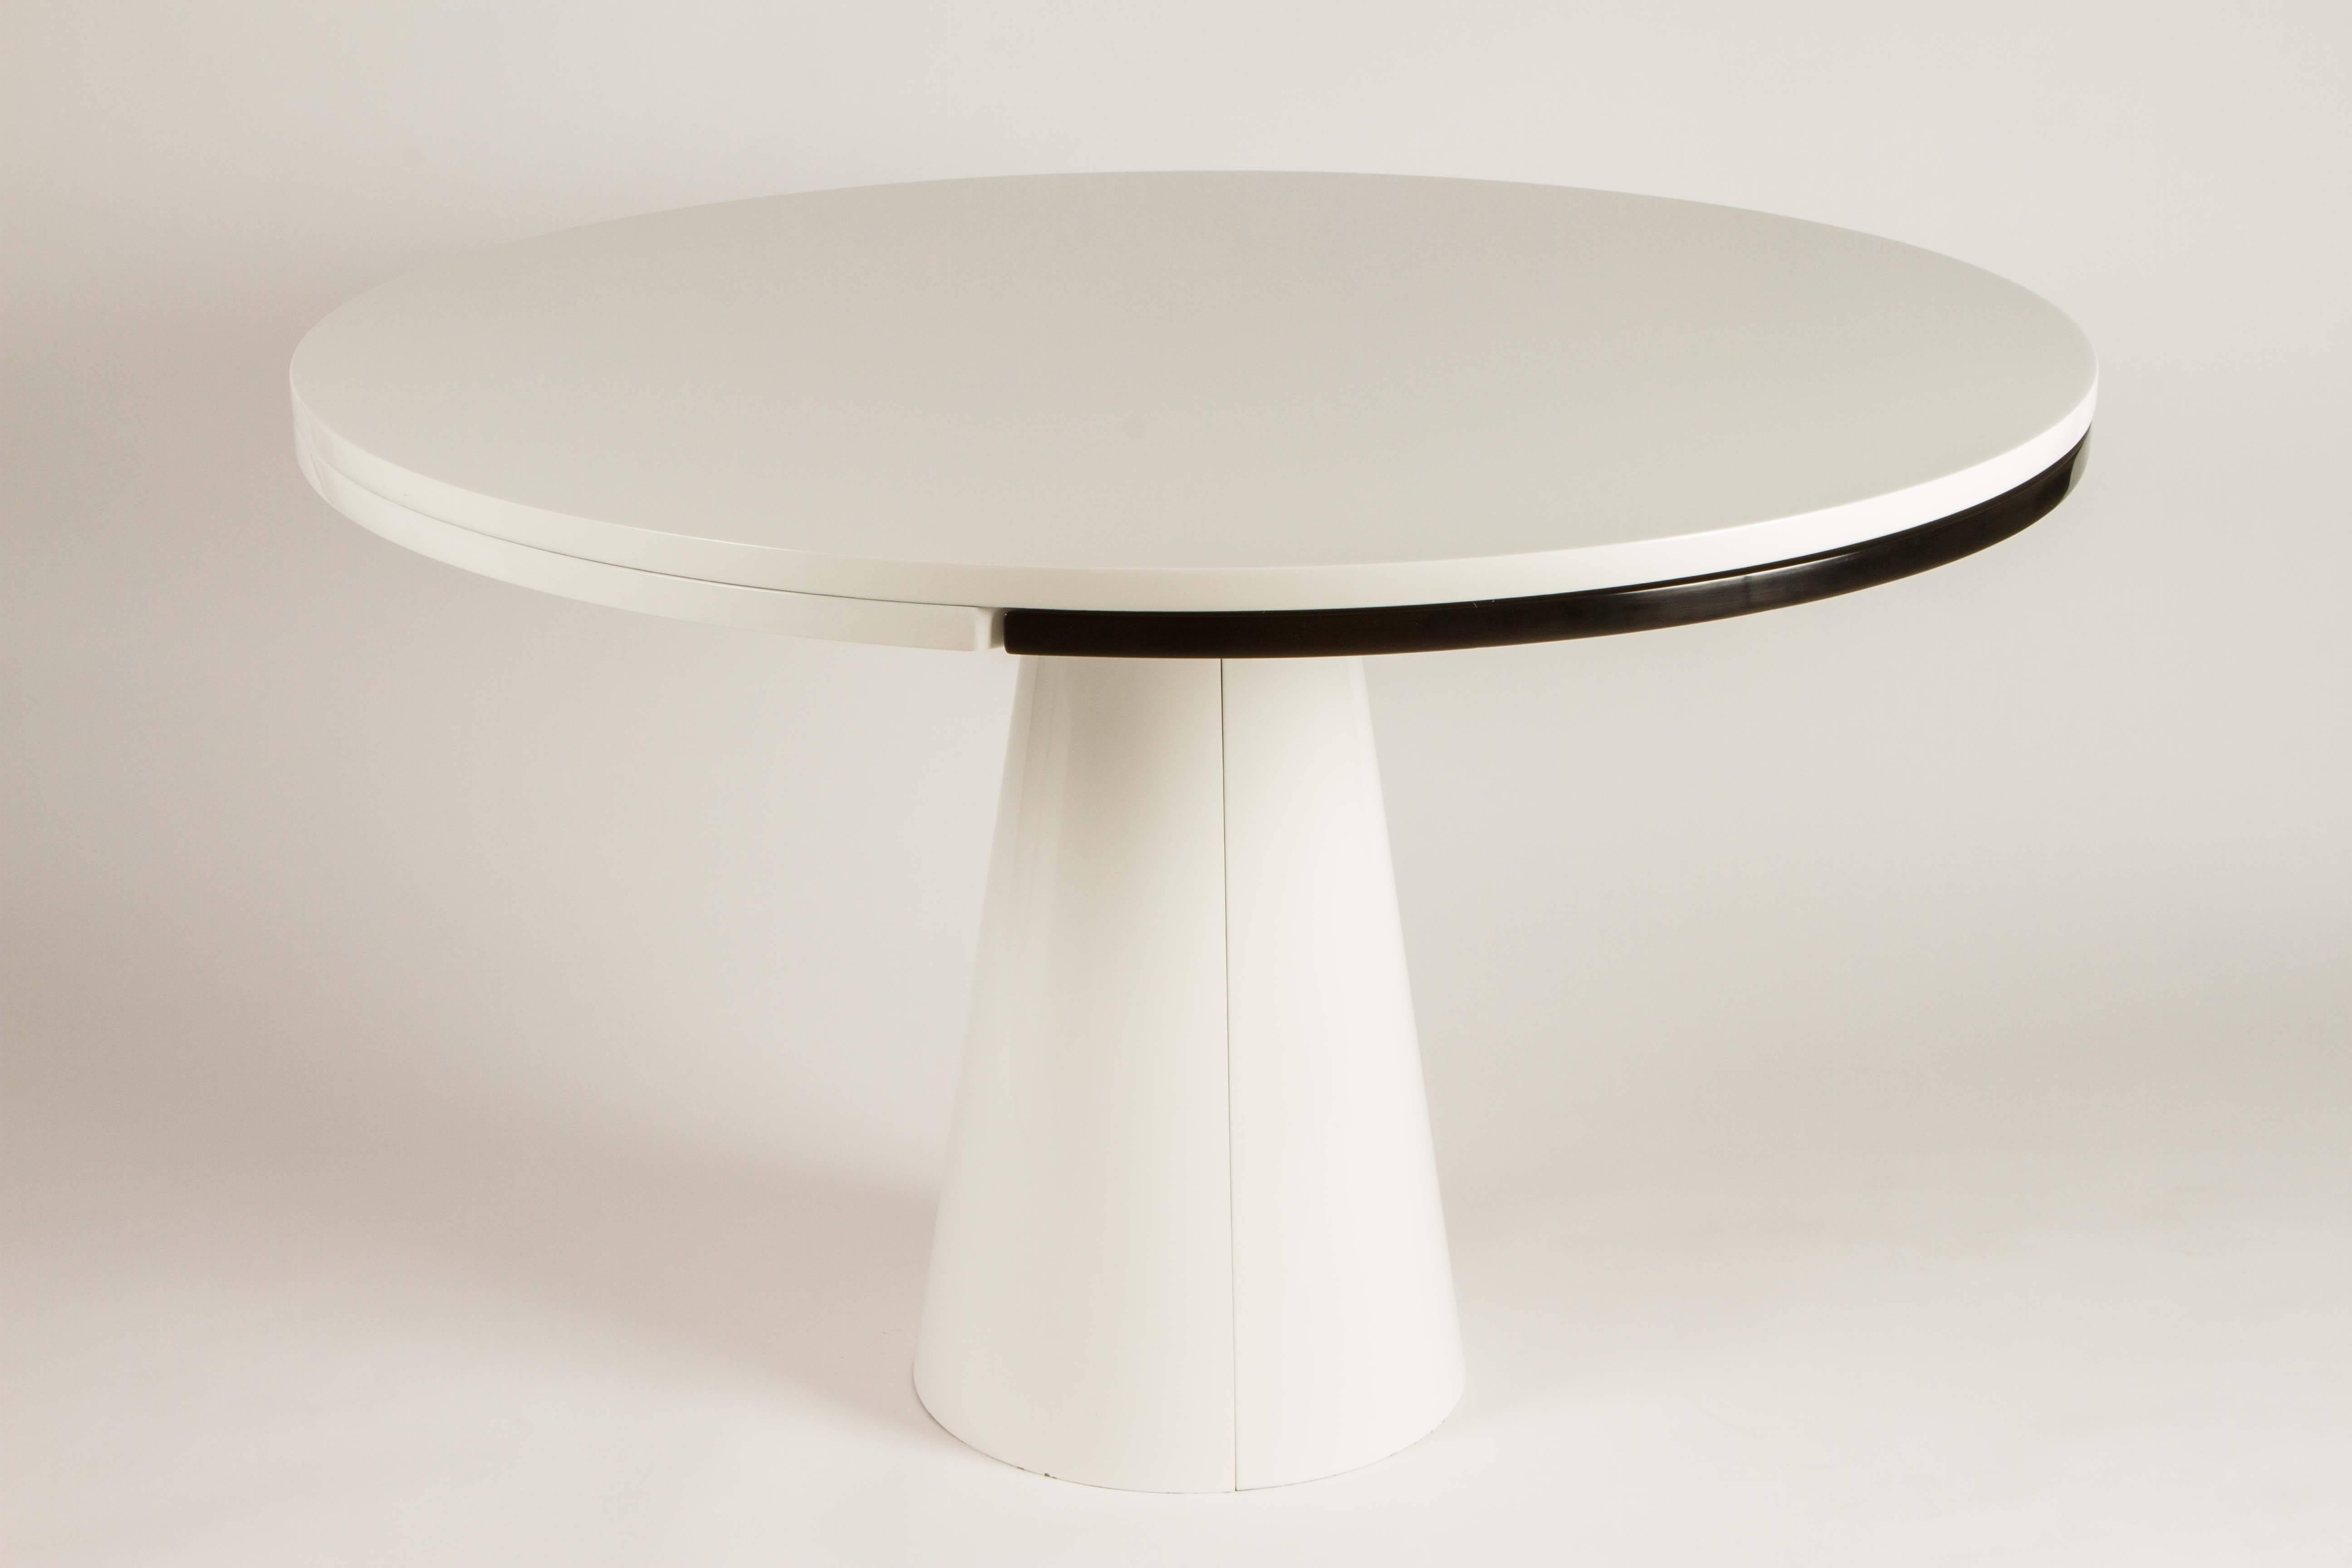 This dining table is very versatile with an unusual method for extending the diameter. The top rotates and drops down slightly and base separates. Closed it is 47